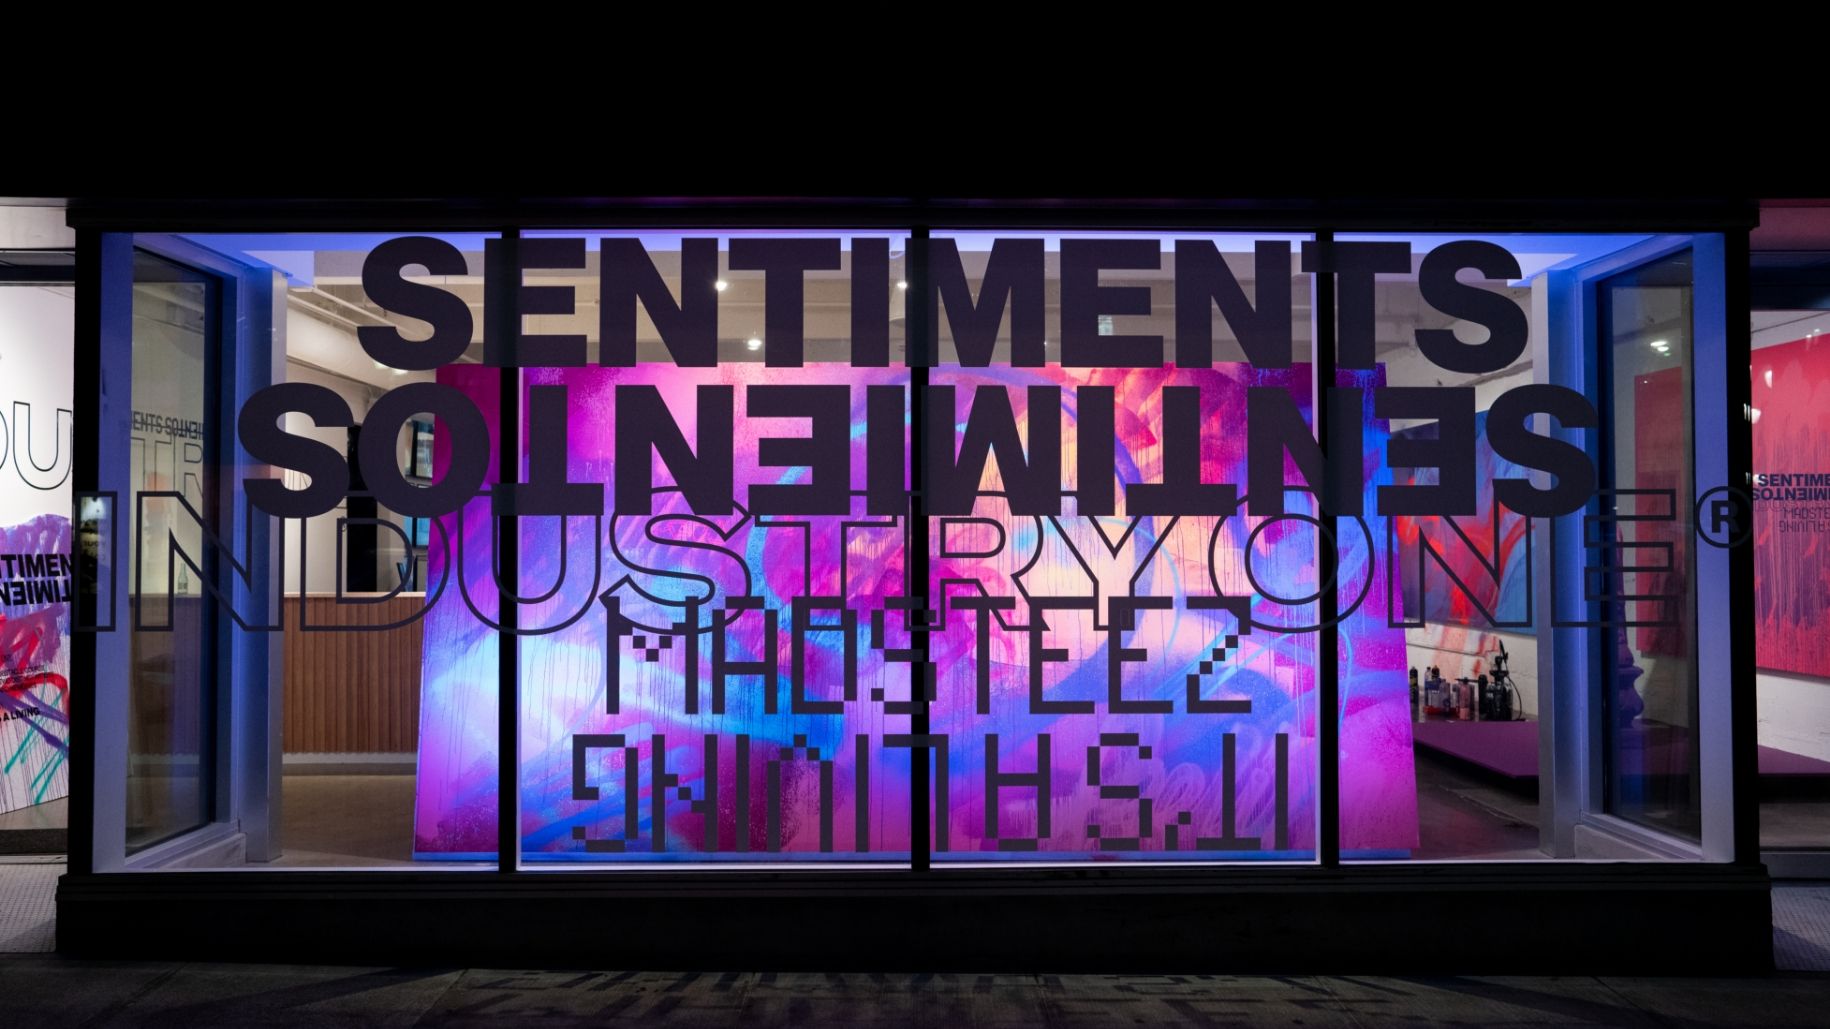 Outside Gallery Storefront window with vinyl stickers reading Sentiments Sentimeientos Industry One Madsteez Its a living